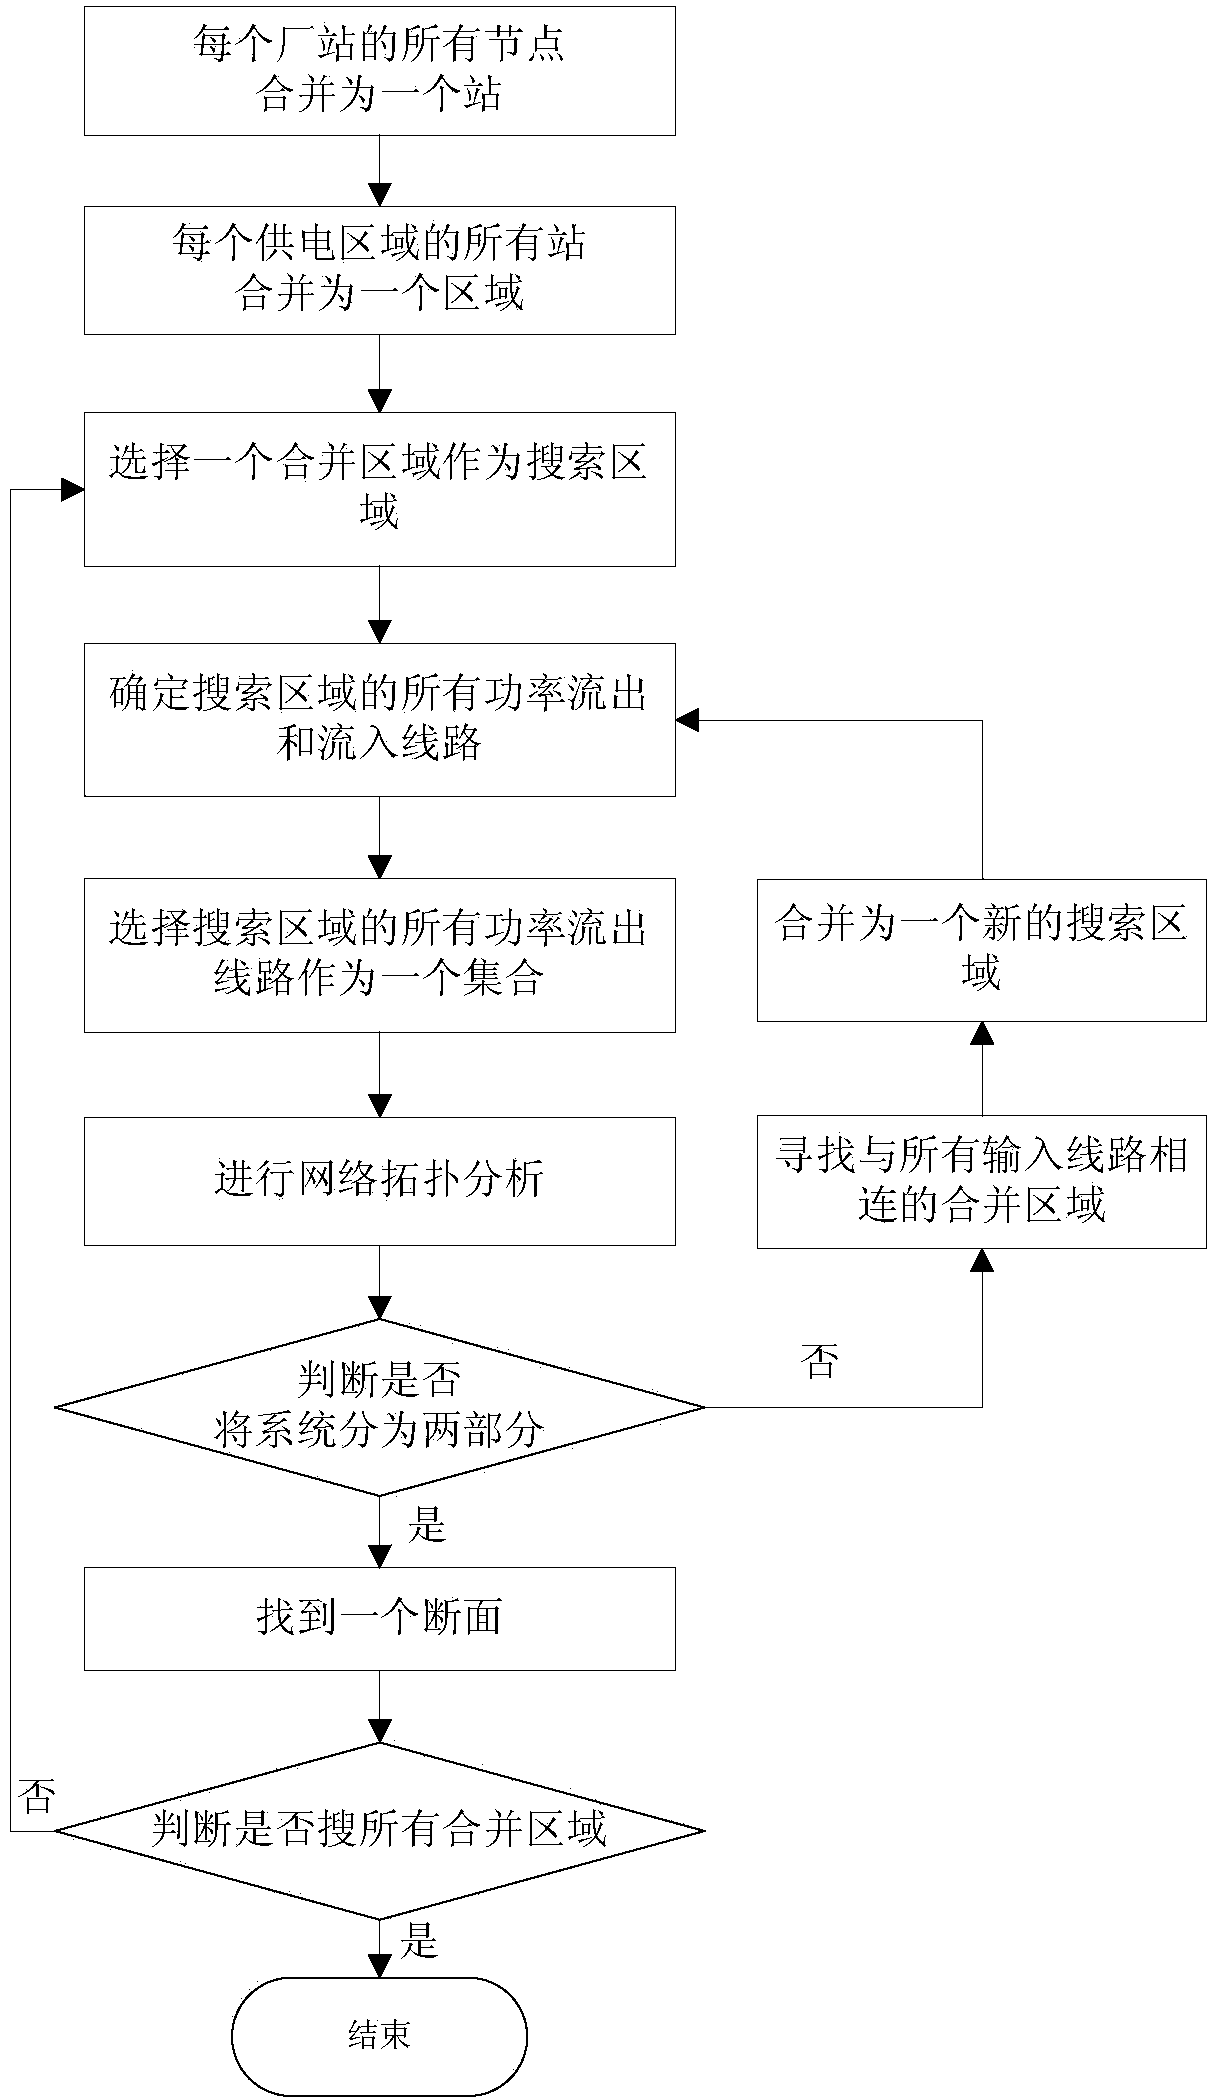 Transmission section search method considering network automatic contraction